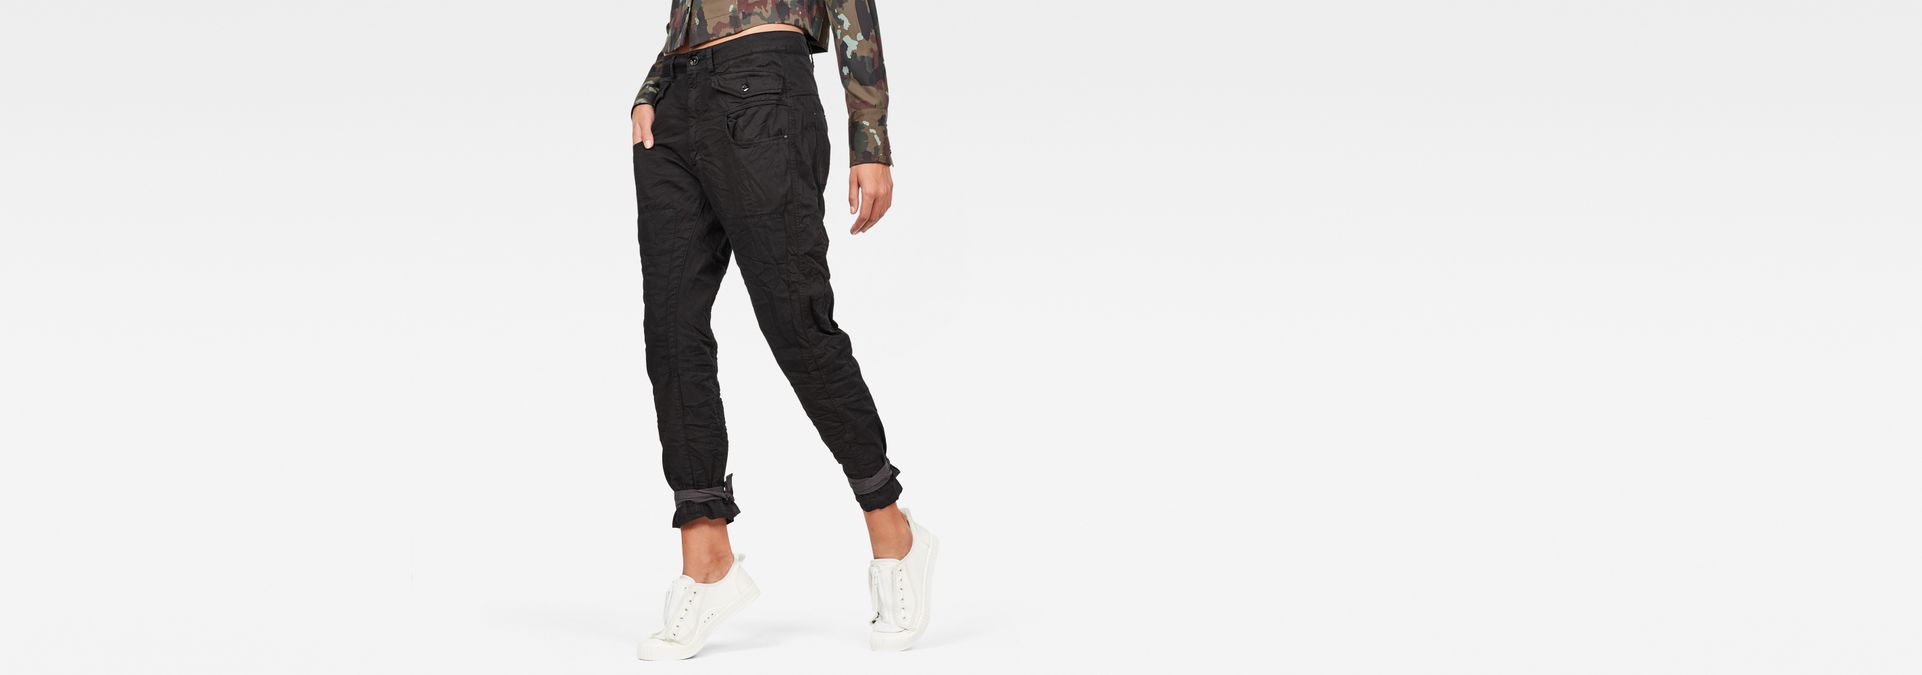 army radar strap relaxed pants